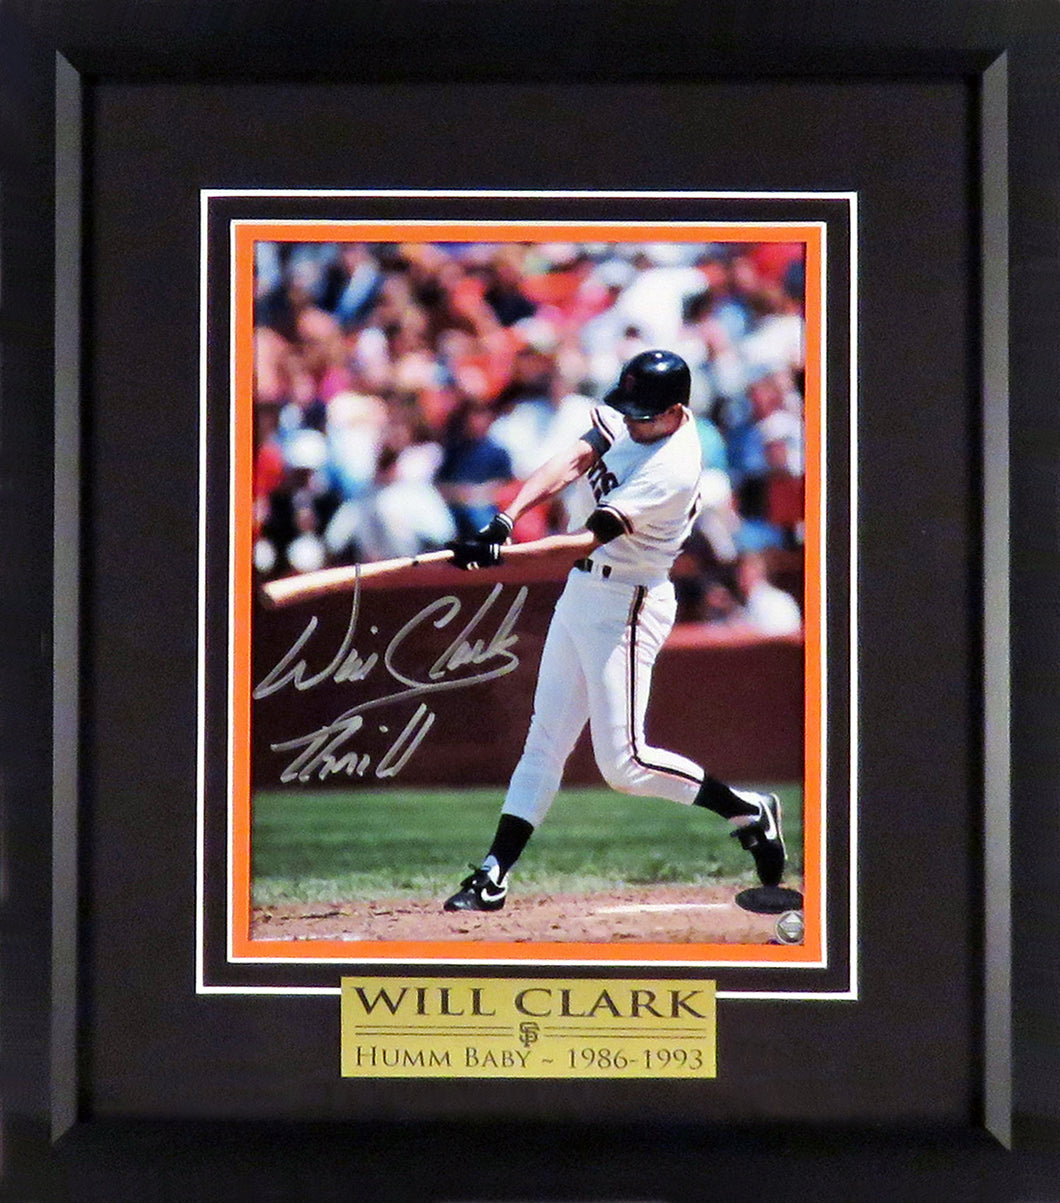 Will Clark Autographed 8x10 Framed Photograph